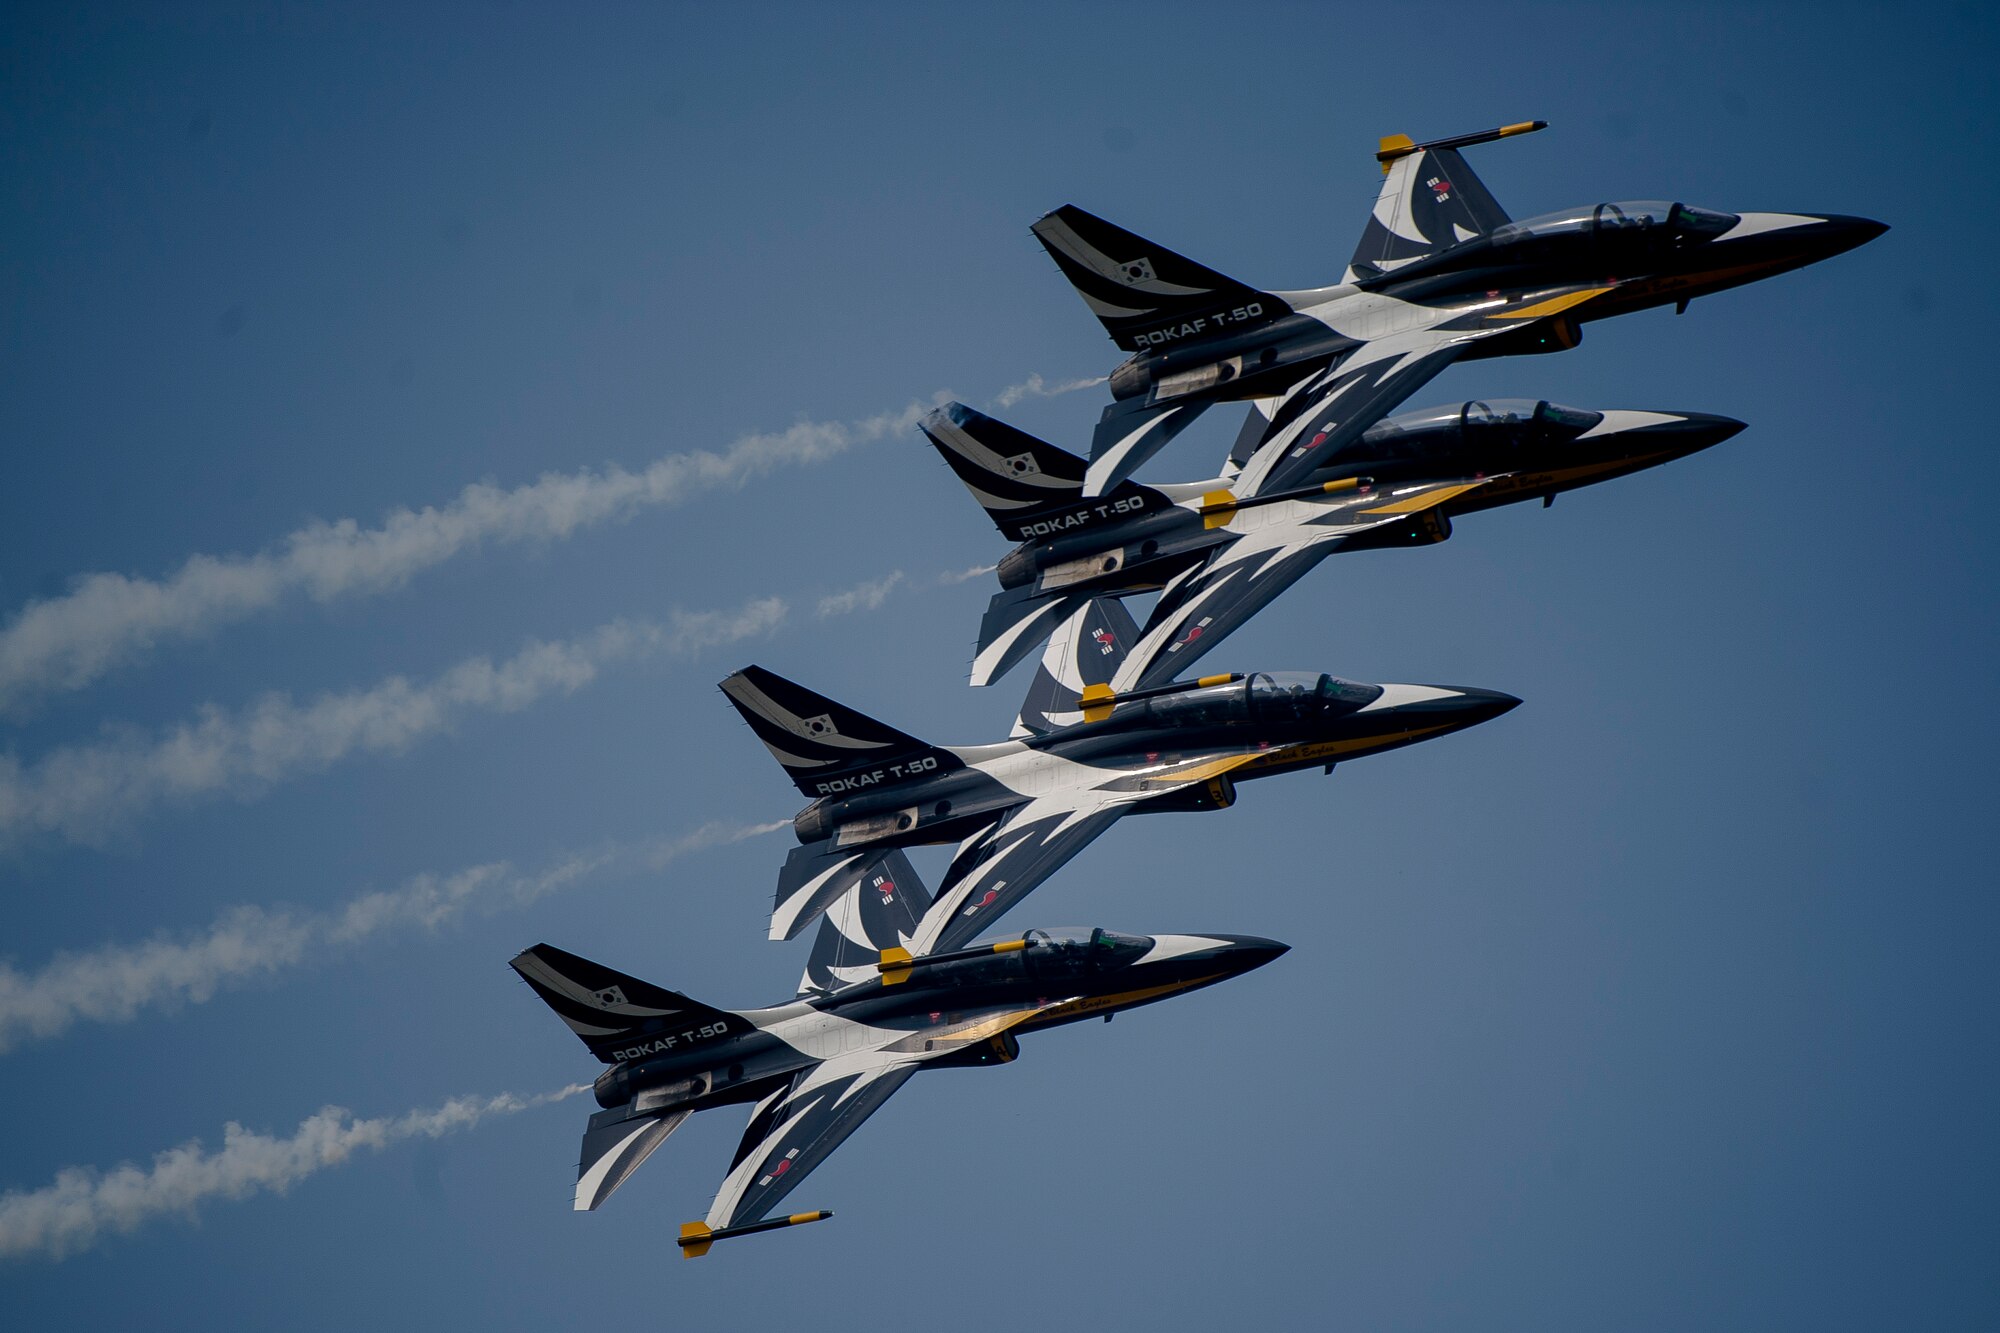 Republic of Korea air force Black Eagles fly in formation during Air Power Day 2016 on Osan Air Base, Republic of Korea, Sept. 25, 2016. Air Power Day was a two-day event that highlighted the partnership between the Republic of Korea and the U.S. military. (U.S. Air Force photo by Staff Sgt. Jonathan Steffen) 